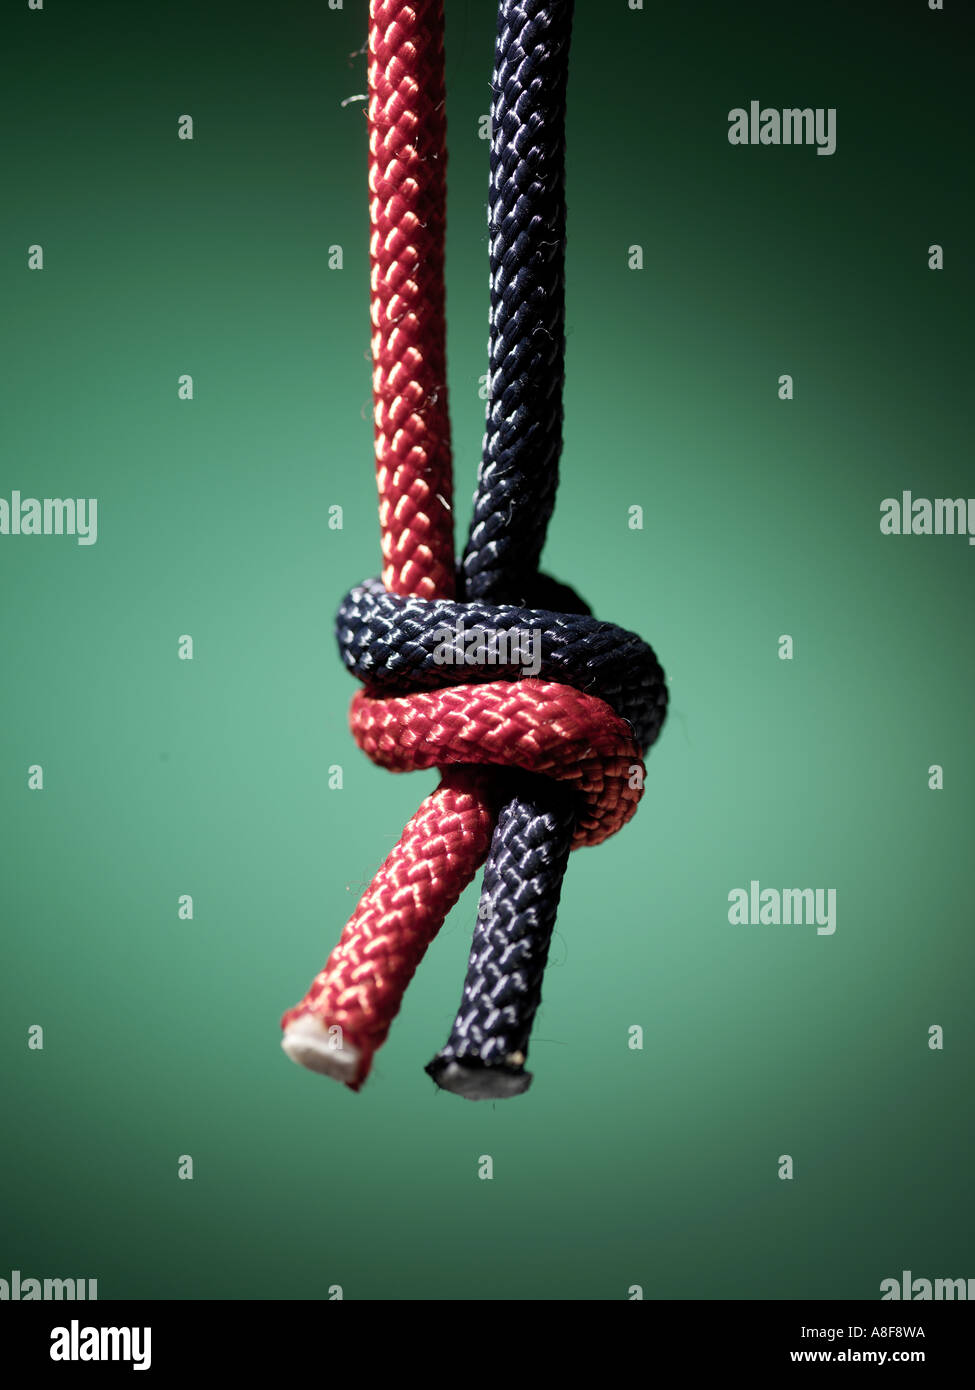 rope, twice, tied knot, blue, red, tough, close up, green background, fabric, tighten, strings Stock Photo